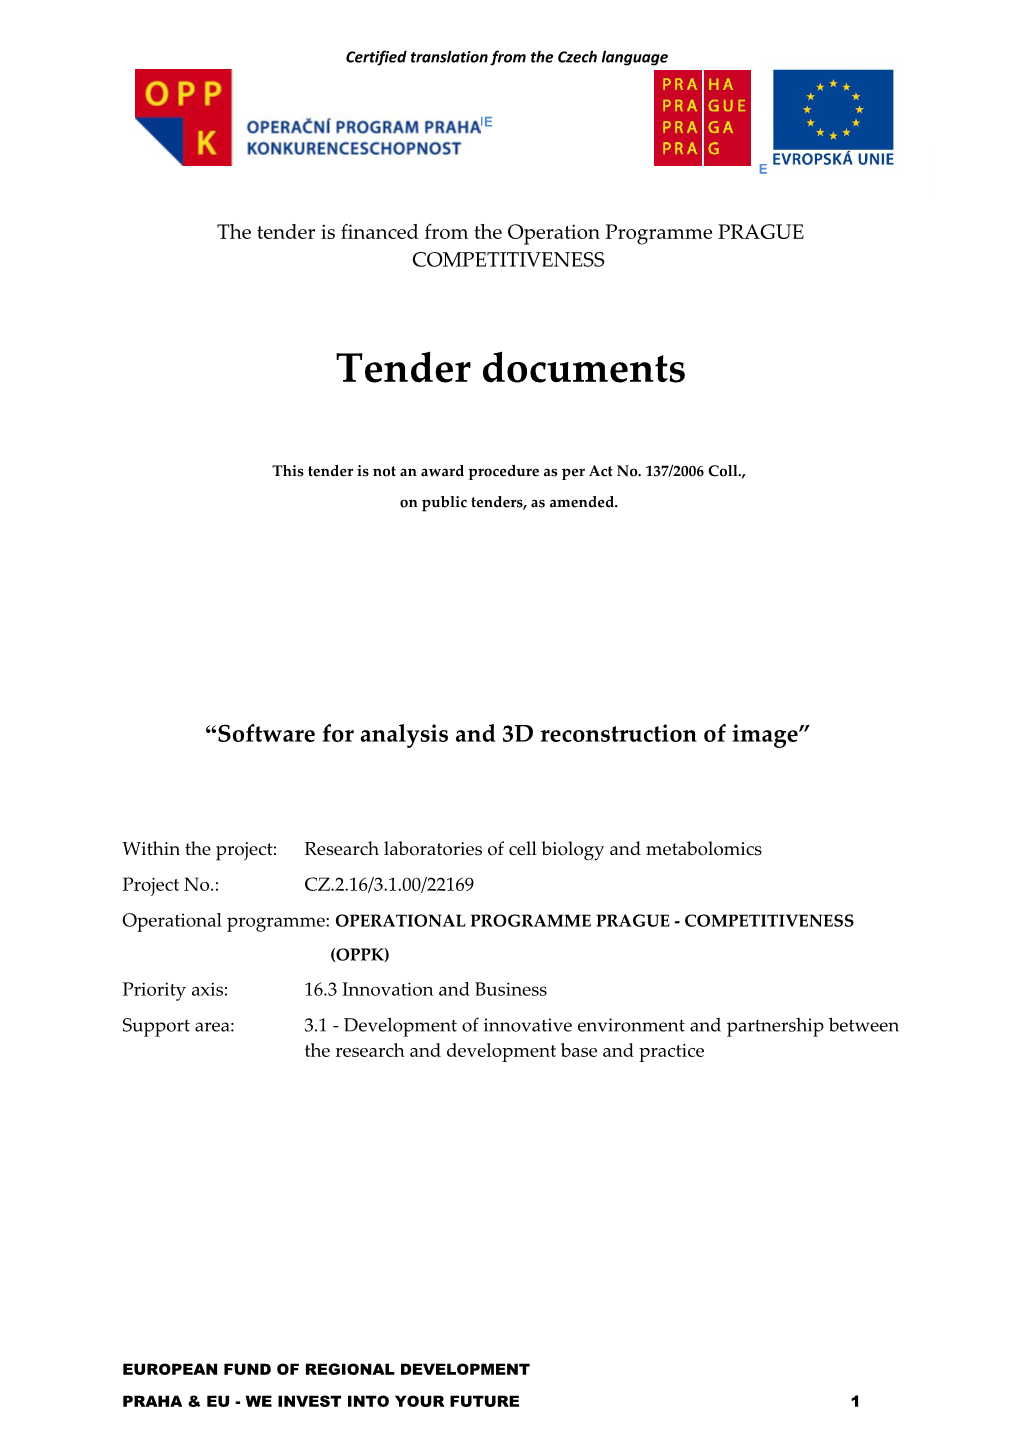 The Tender Is Financed from the Operation Programme PRAGUE COMPETITIVENESS